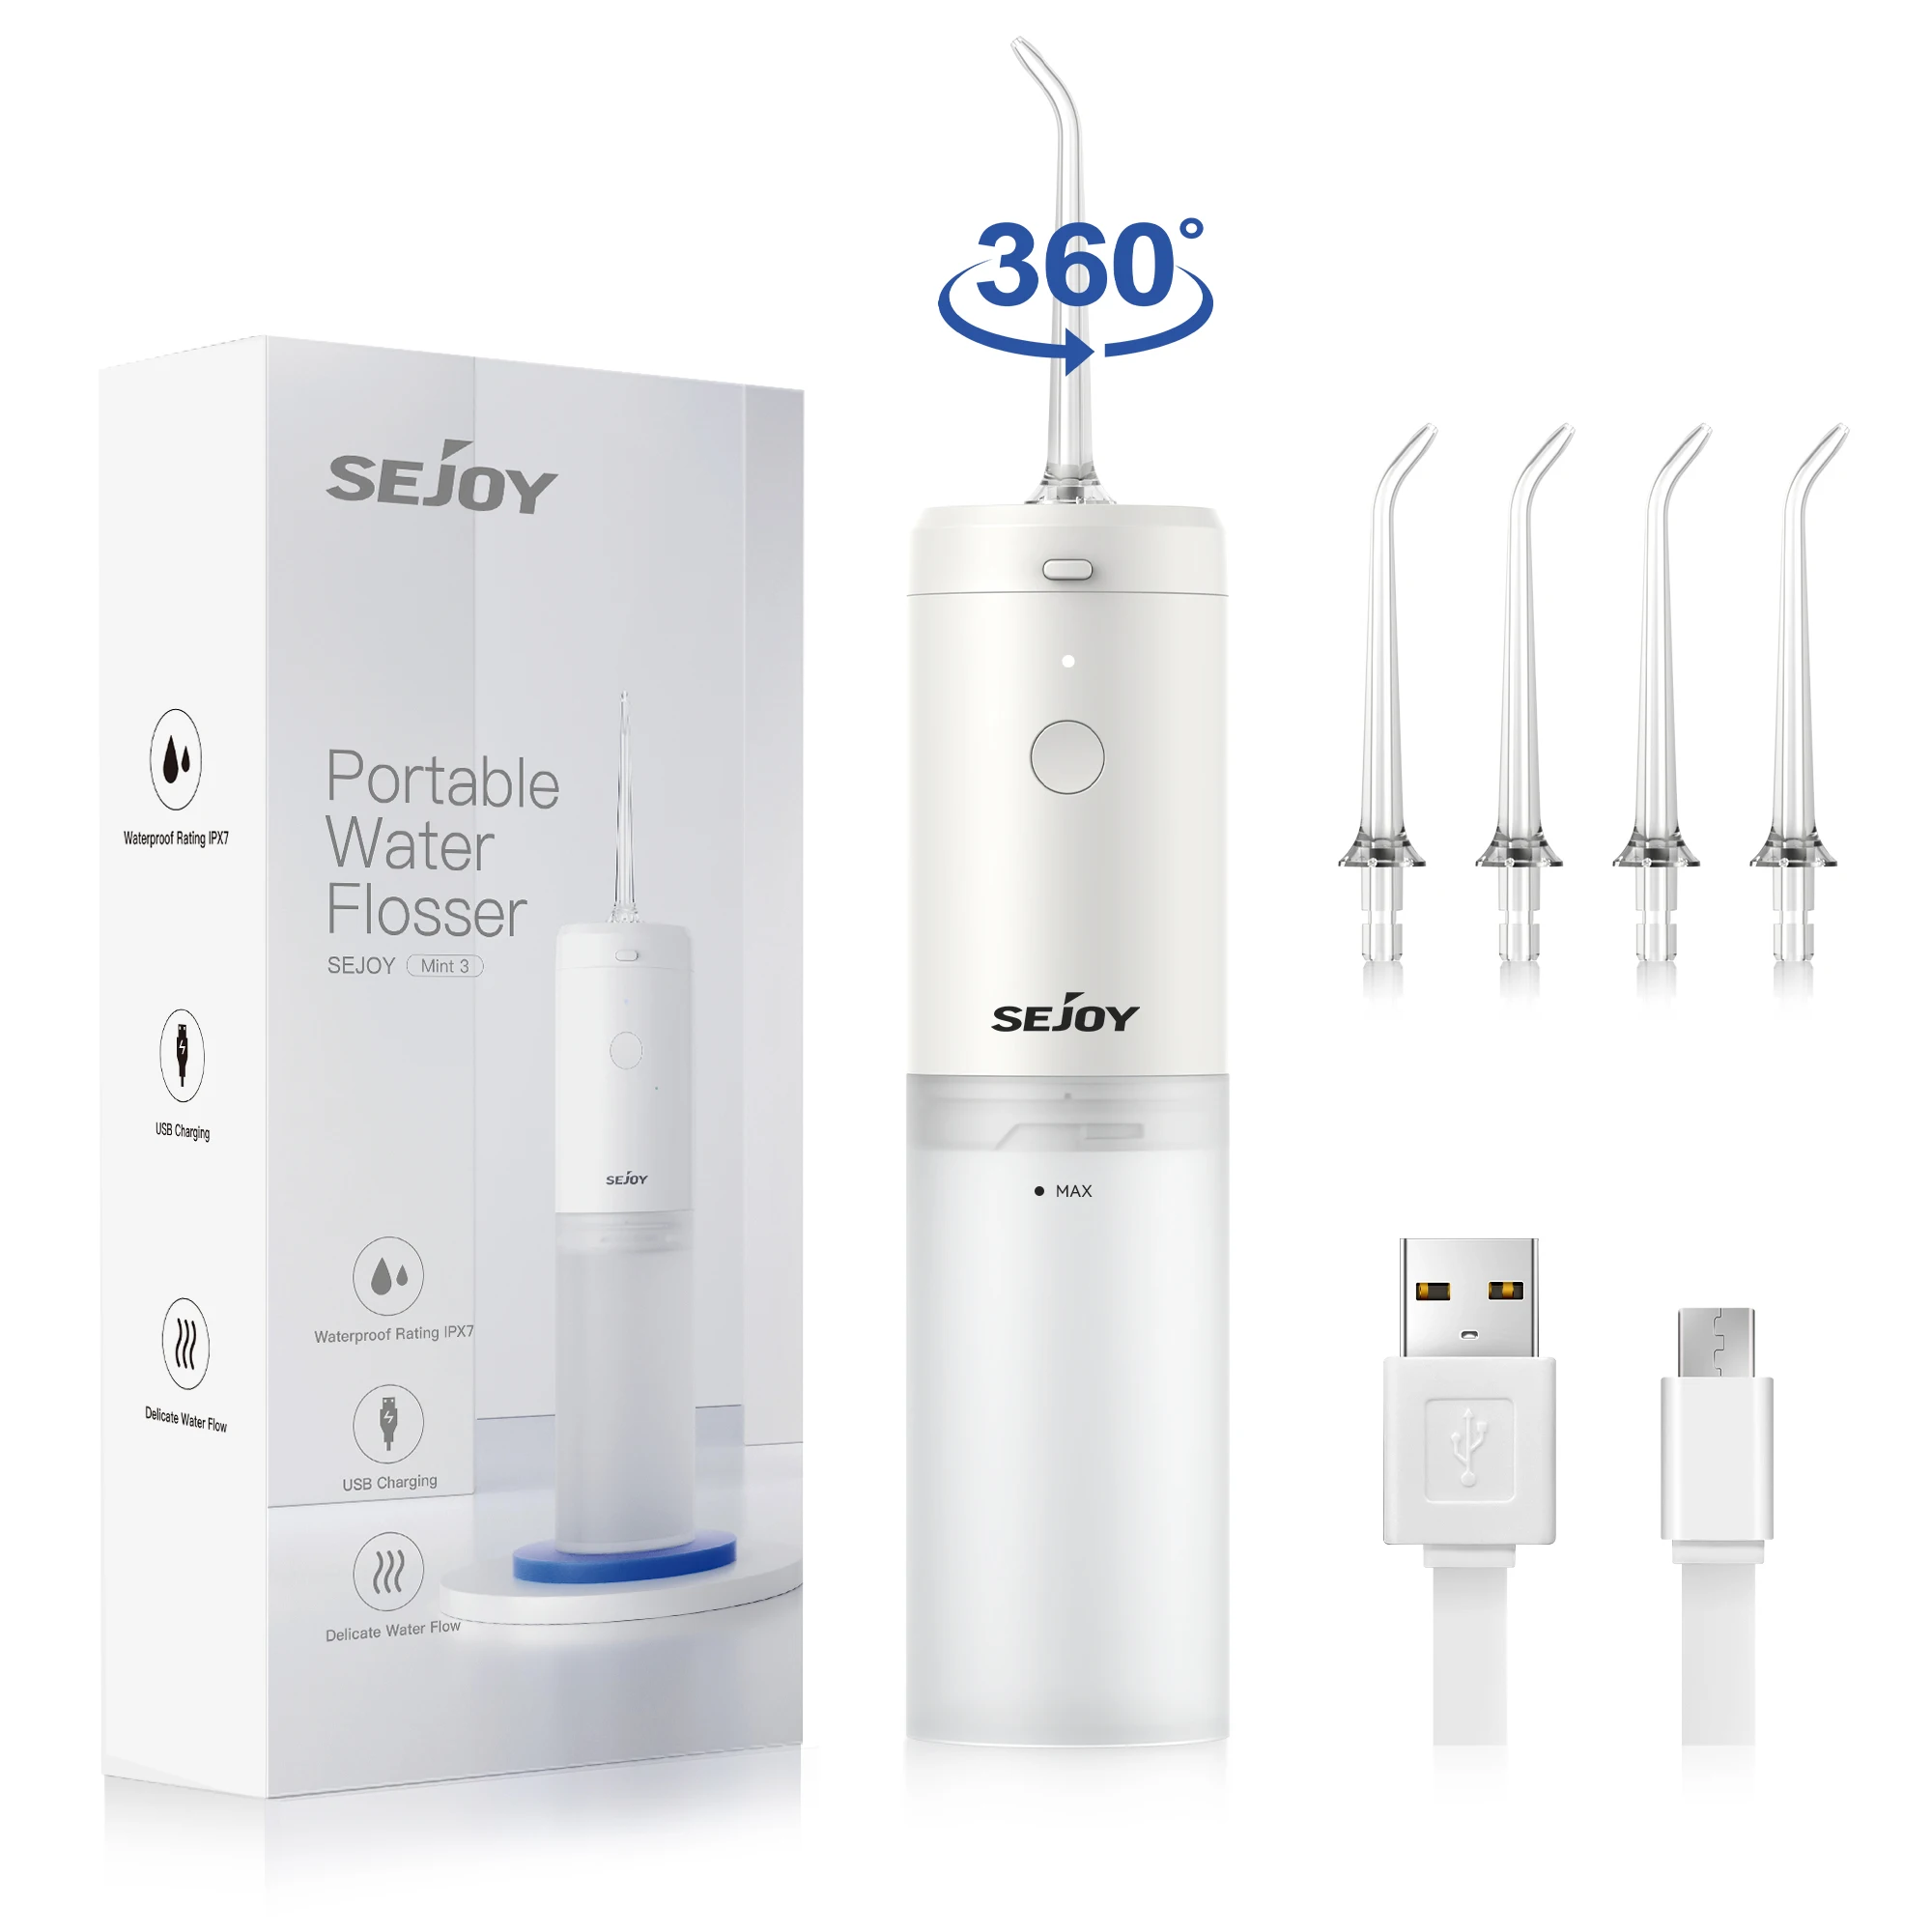 

Sejoy Portable Oral Irrigator Water Flosser Dental Water Jet Tools Cleaning Teeth 4 Nozzles Mouth Washing Machine Home Appliance